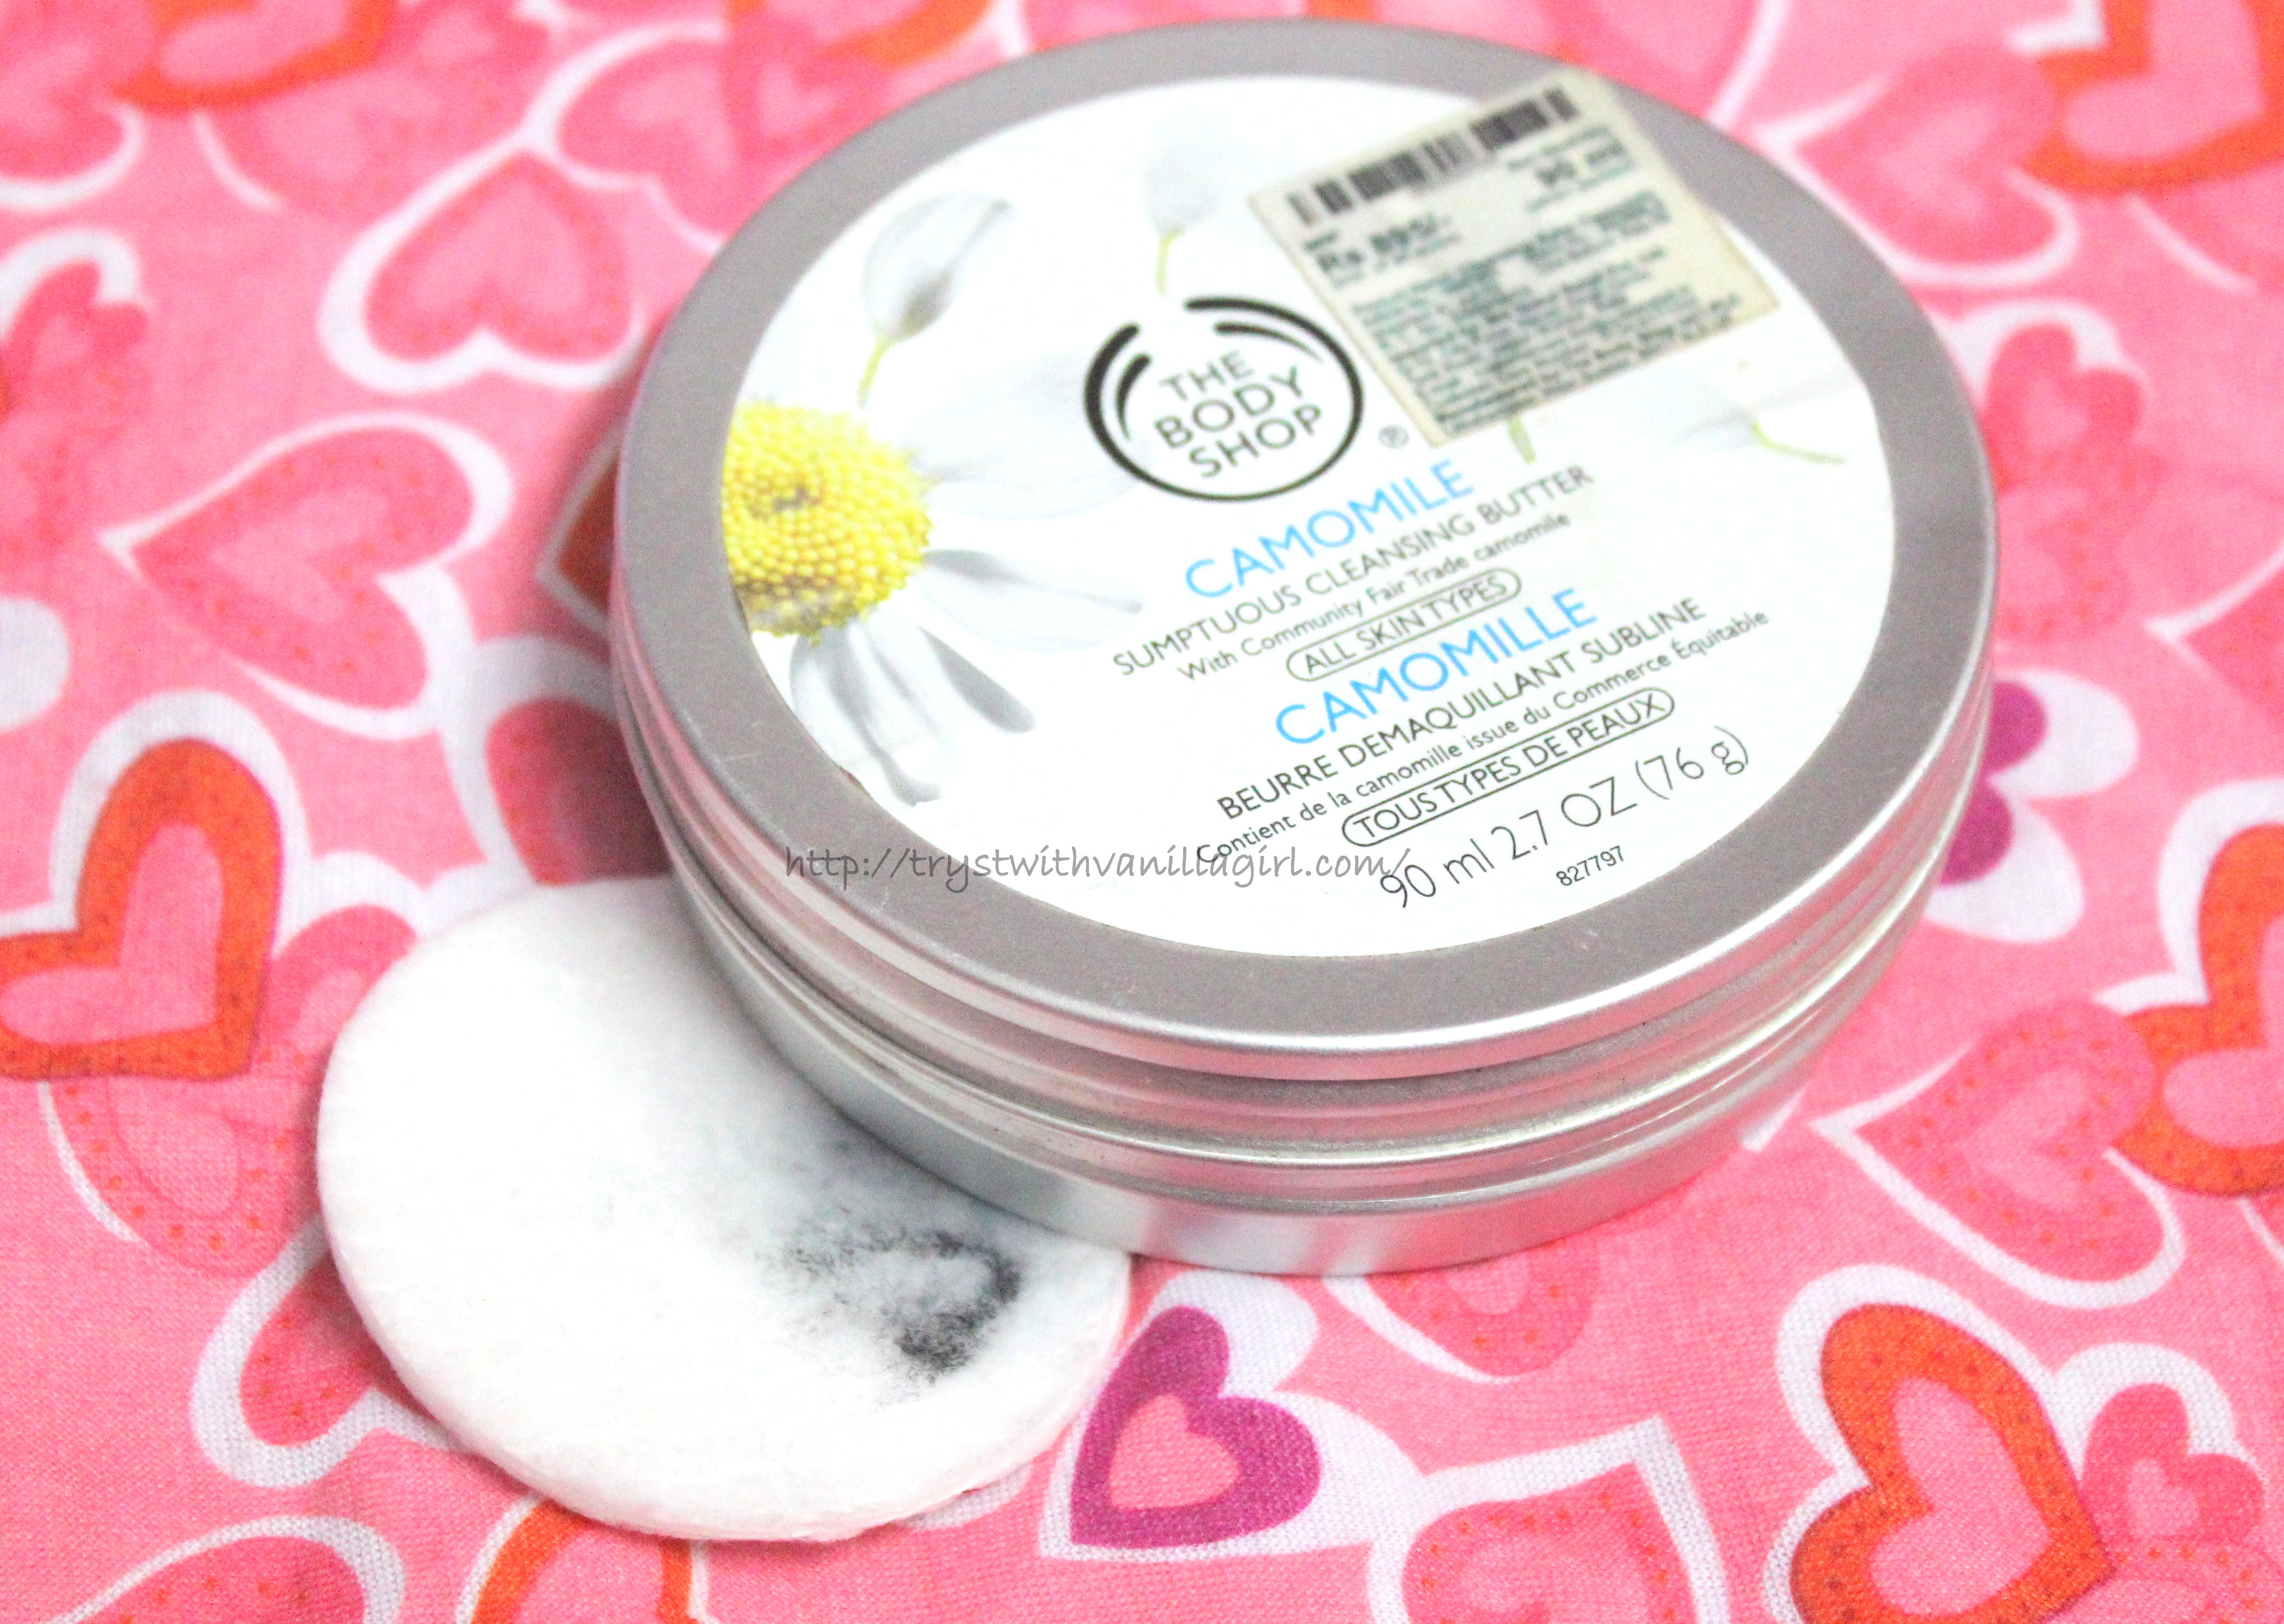 THE BOSYSHOP CAMOMILE SUMPTUOUS CLEANSING BUTTER REVIEW